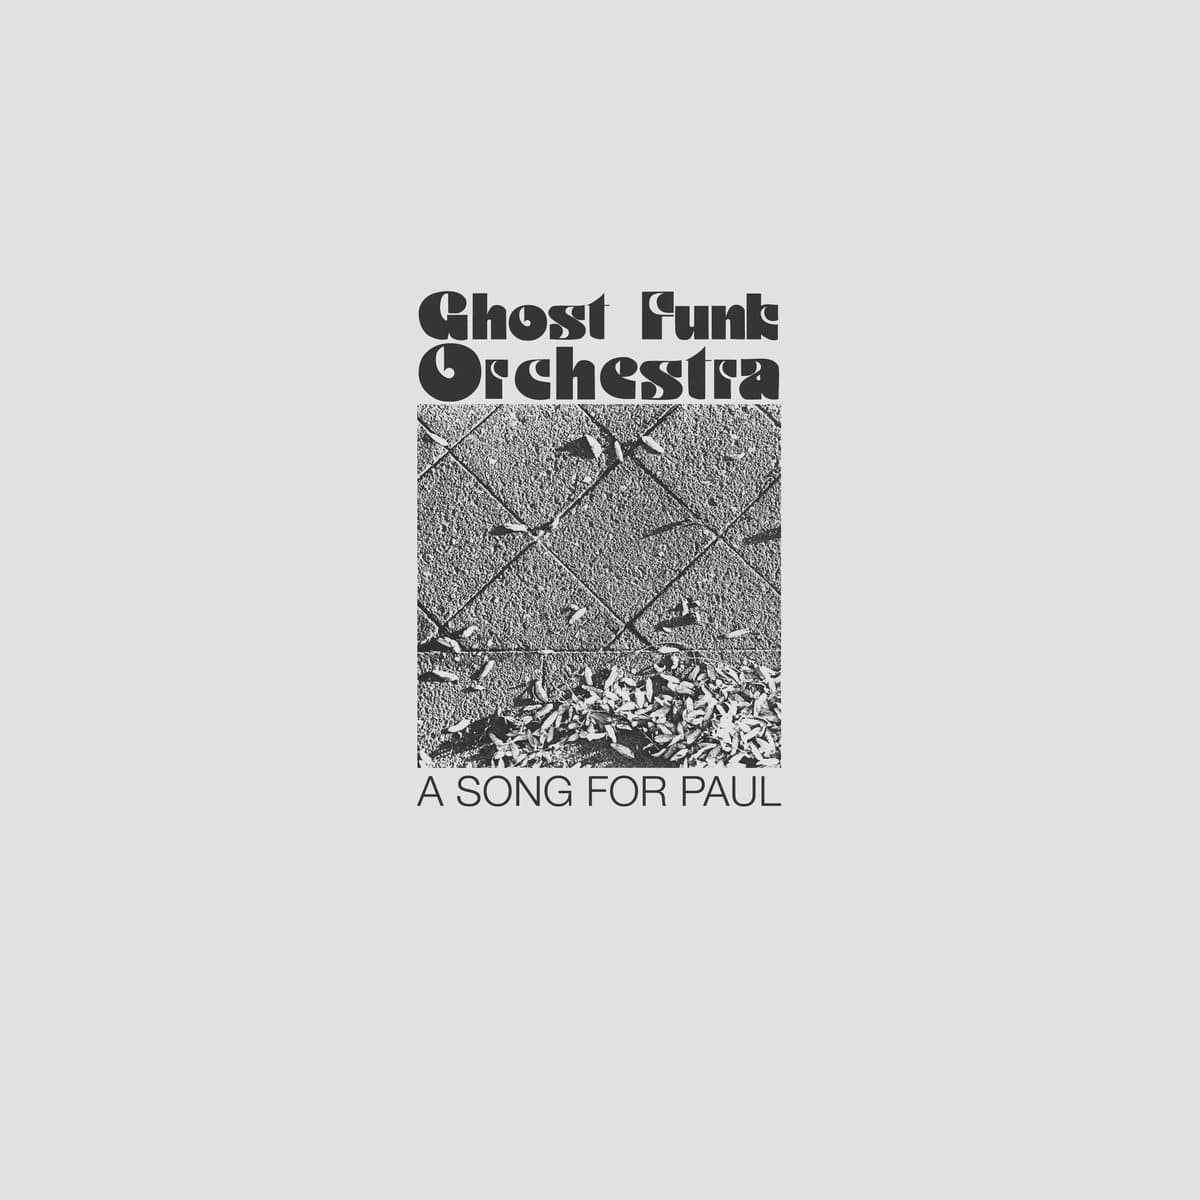 Ghost Funk Orchestra - A Song For Paul - KCRLP120002 - KARMA CHIEF RECORDS